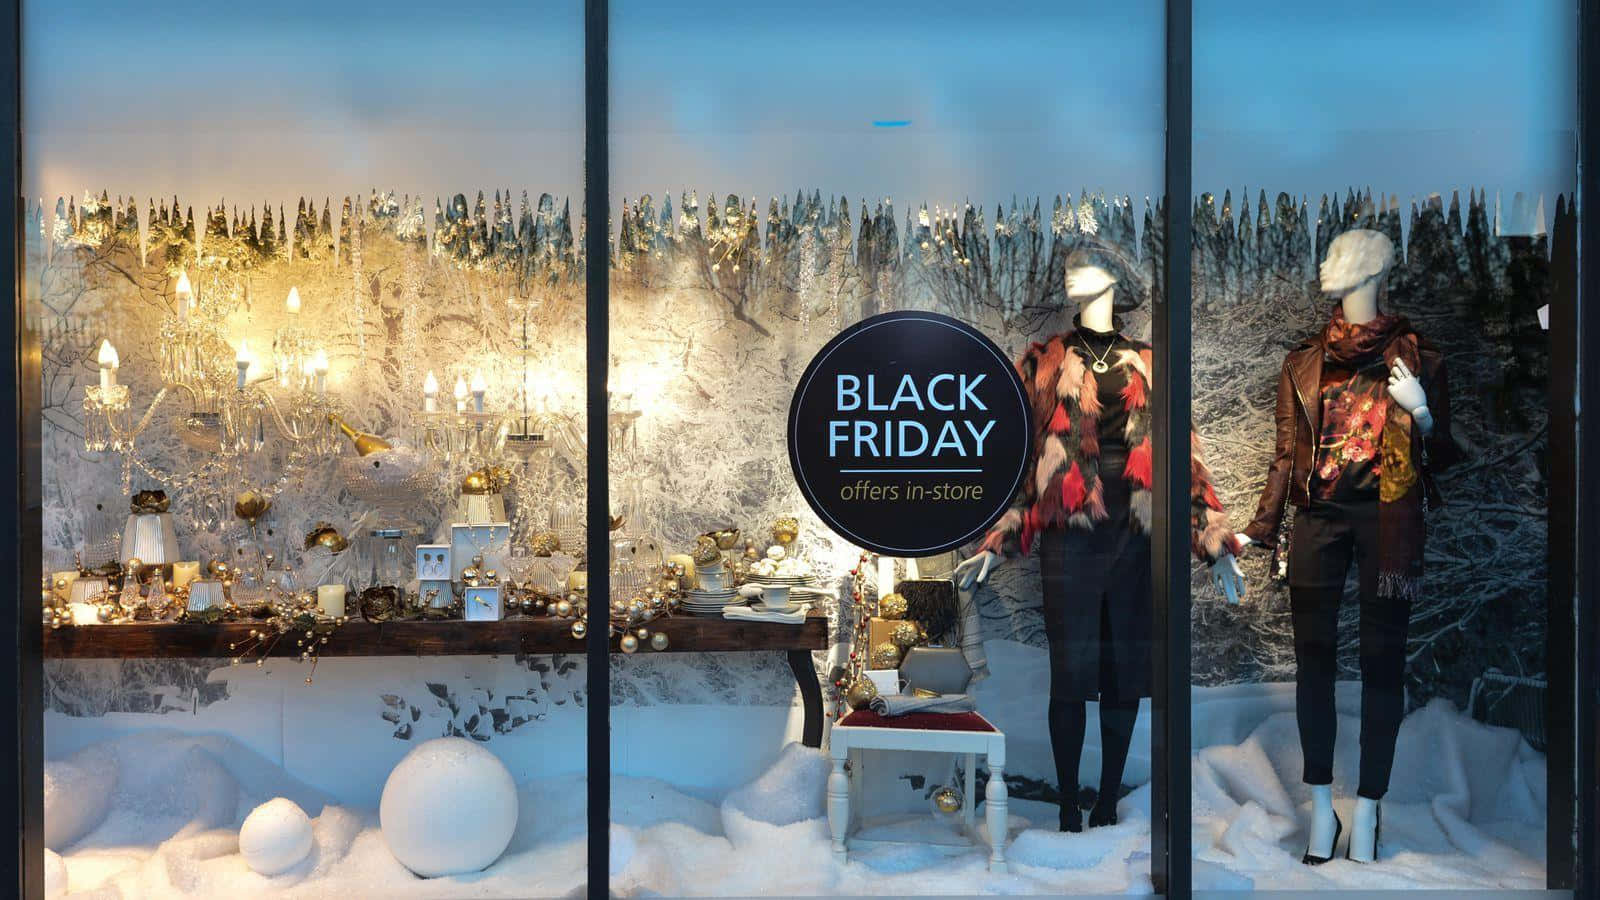 A Black Friday Window Display With Mannequins And Snow